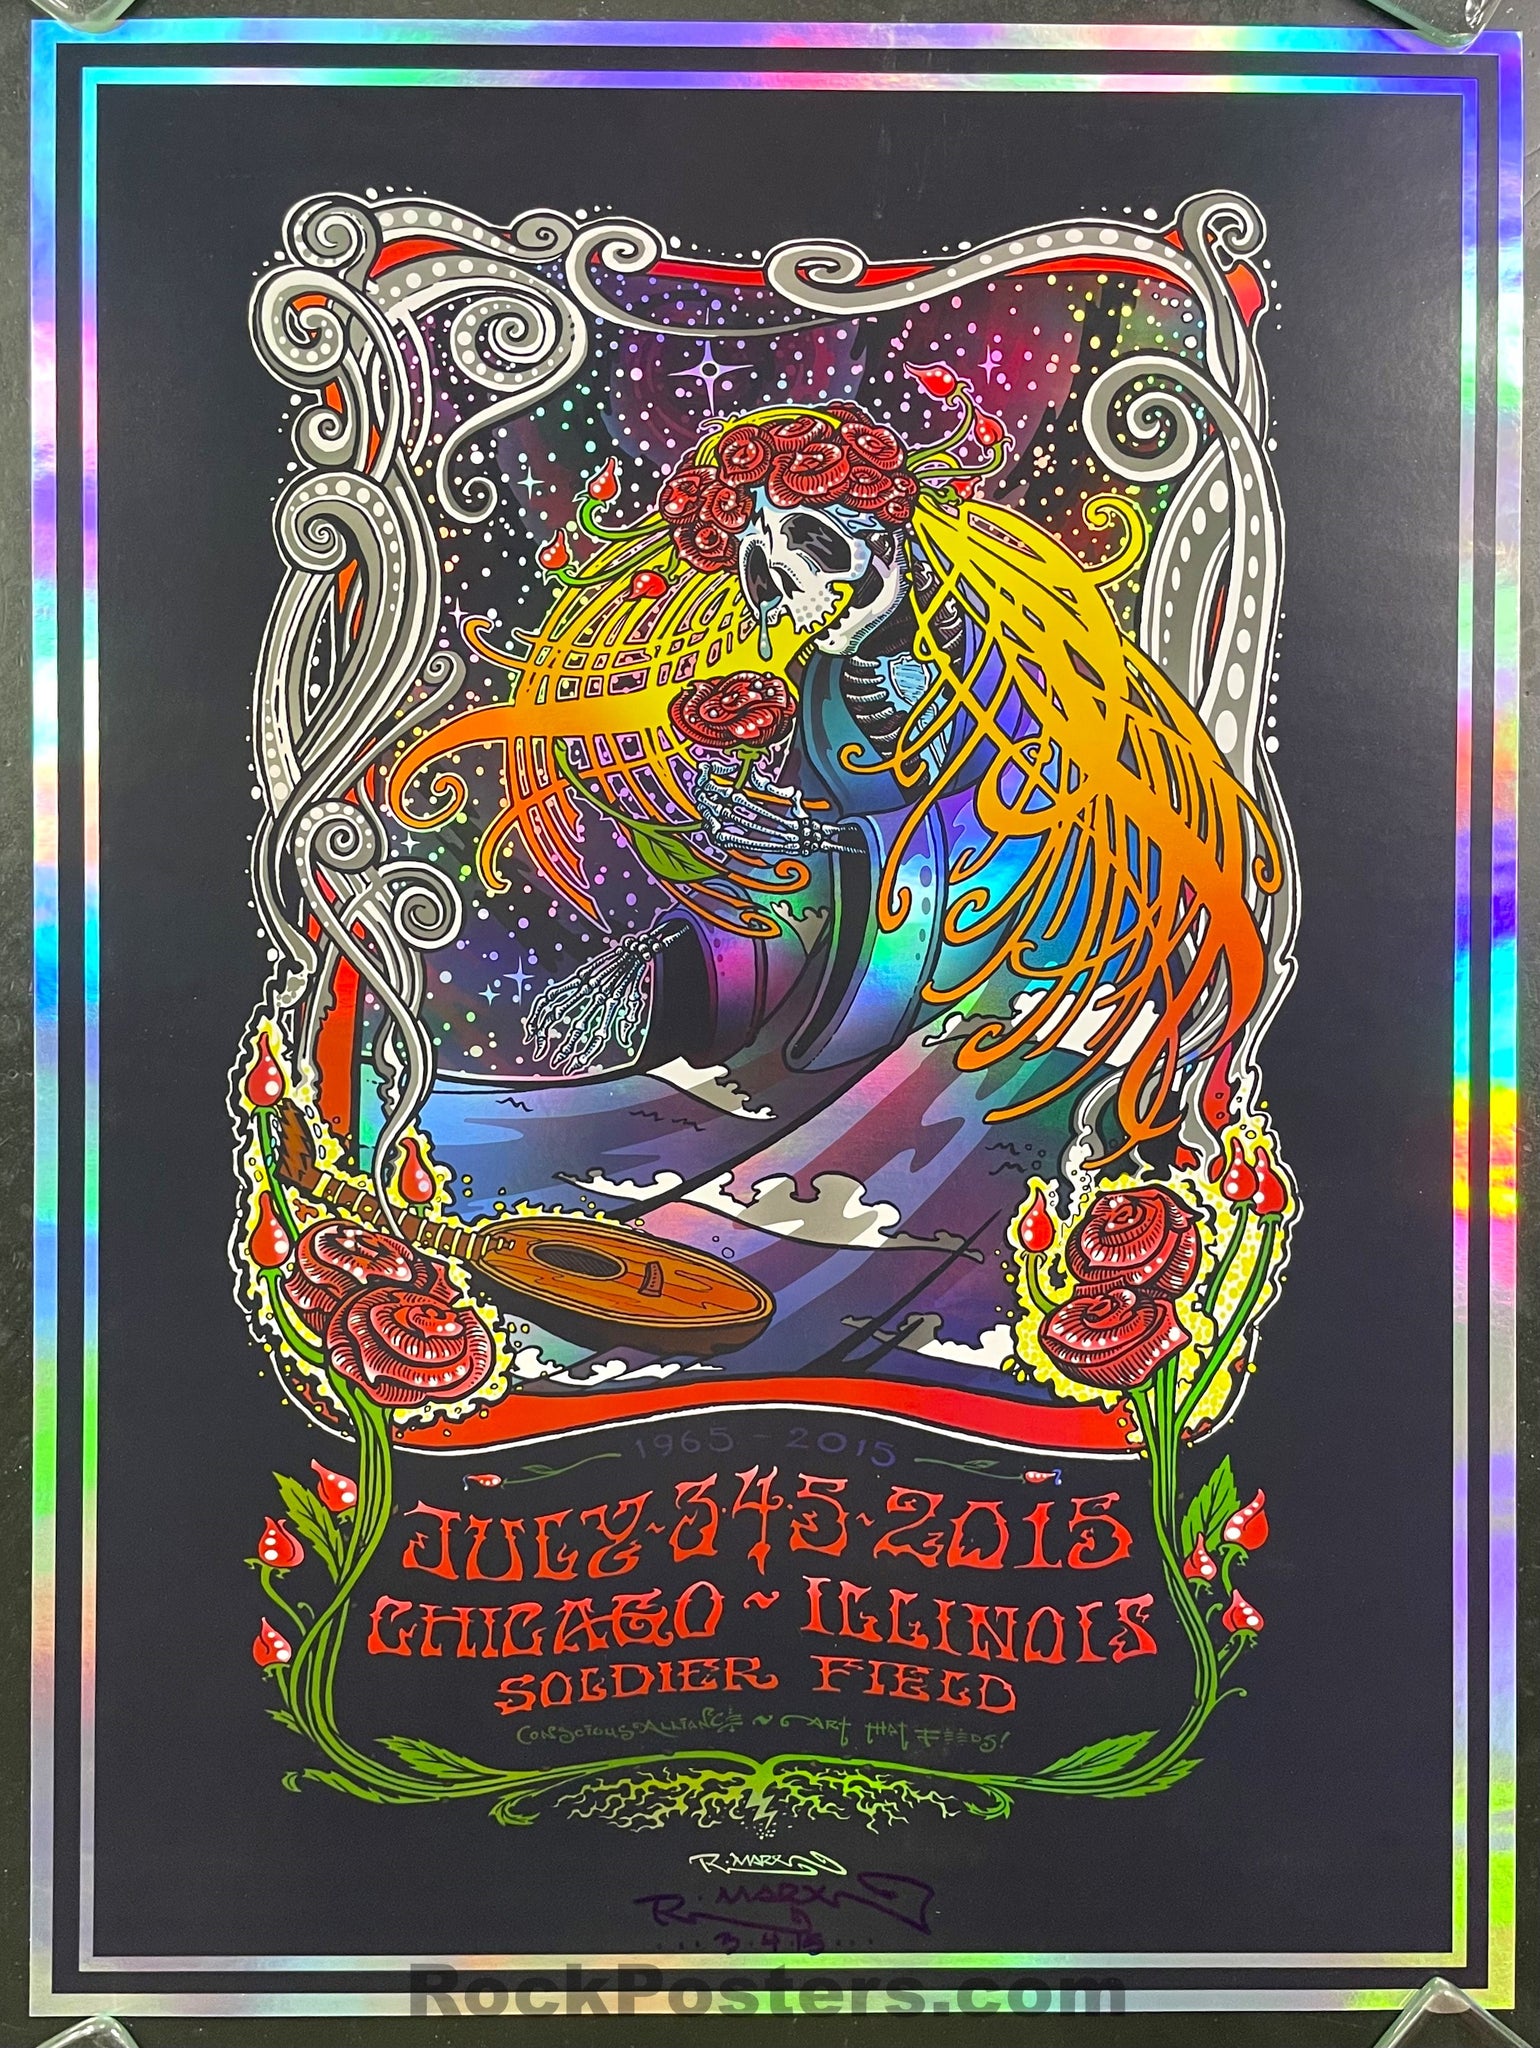 AUCTION - Grateful Dead - Fare Thee Well - Robert Marx Signed - 2015 Foil Poster - Soldier Field Chicago - Excellent